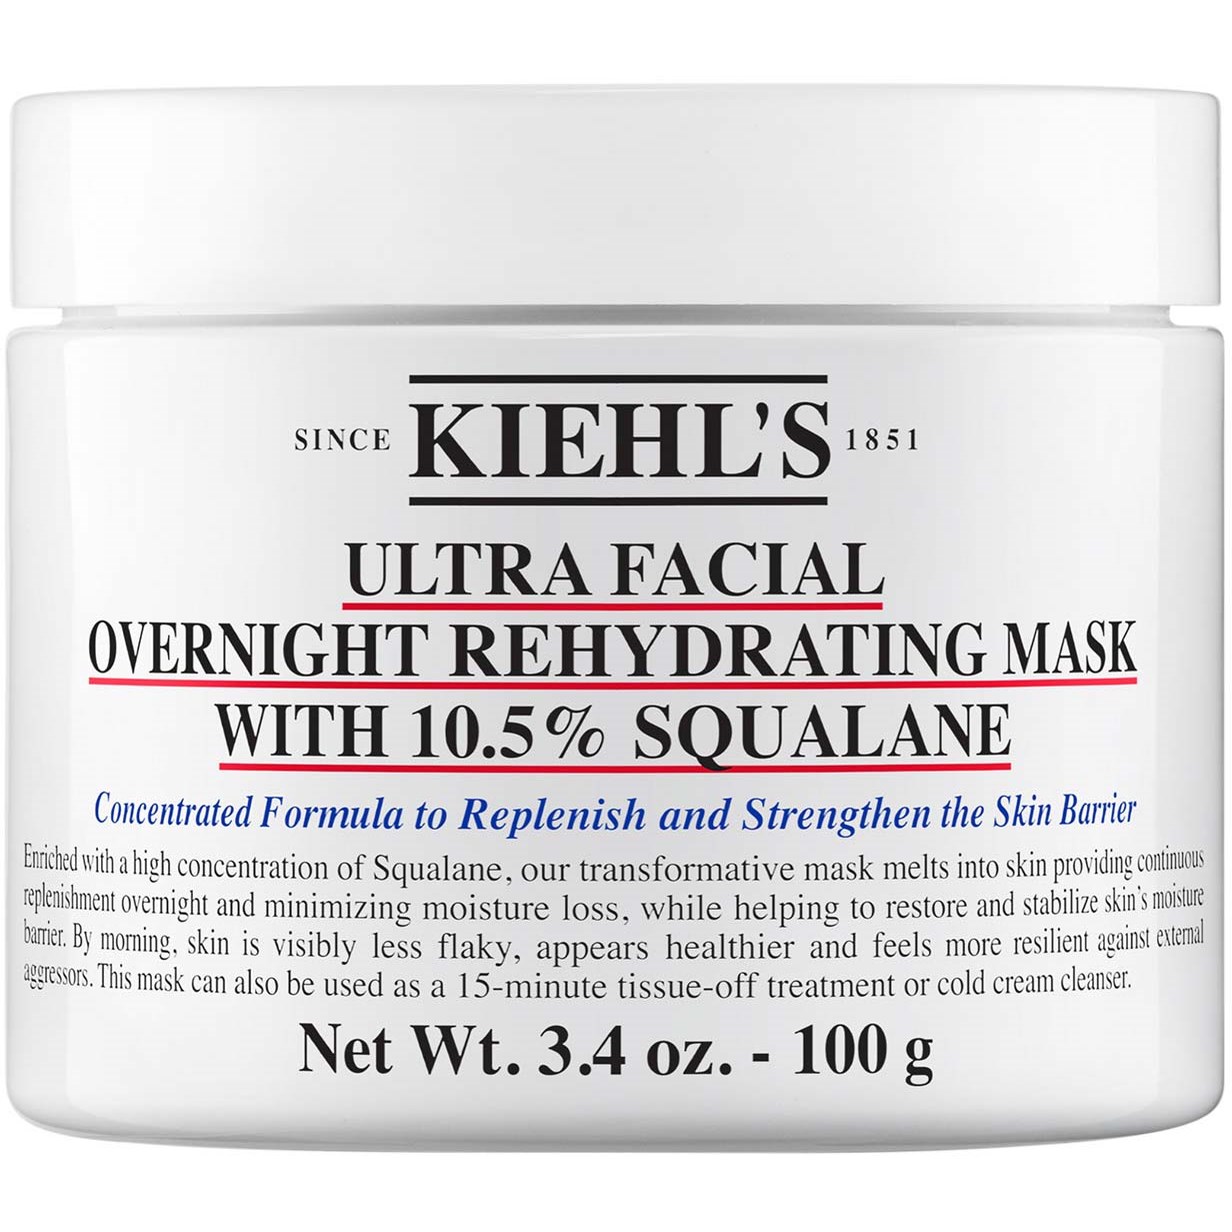 Kiehls Ultra Facial Overnight Rehydrating Mask with 10.5% Squalane 1